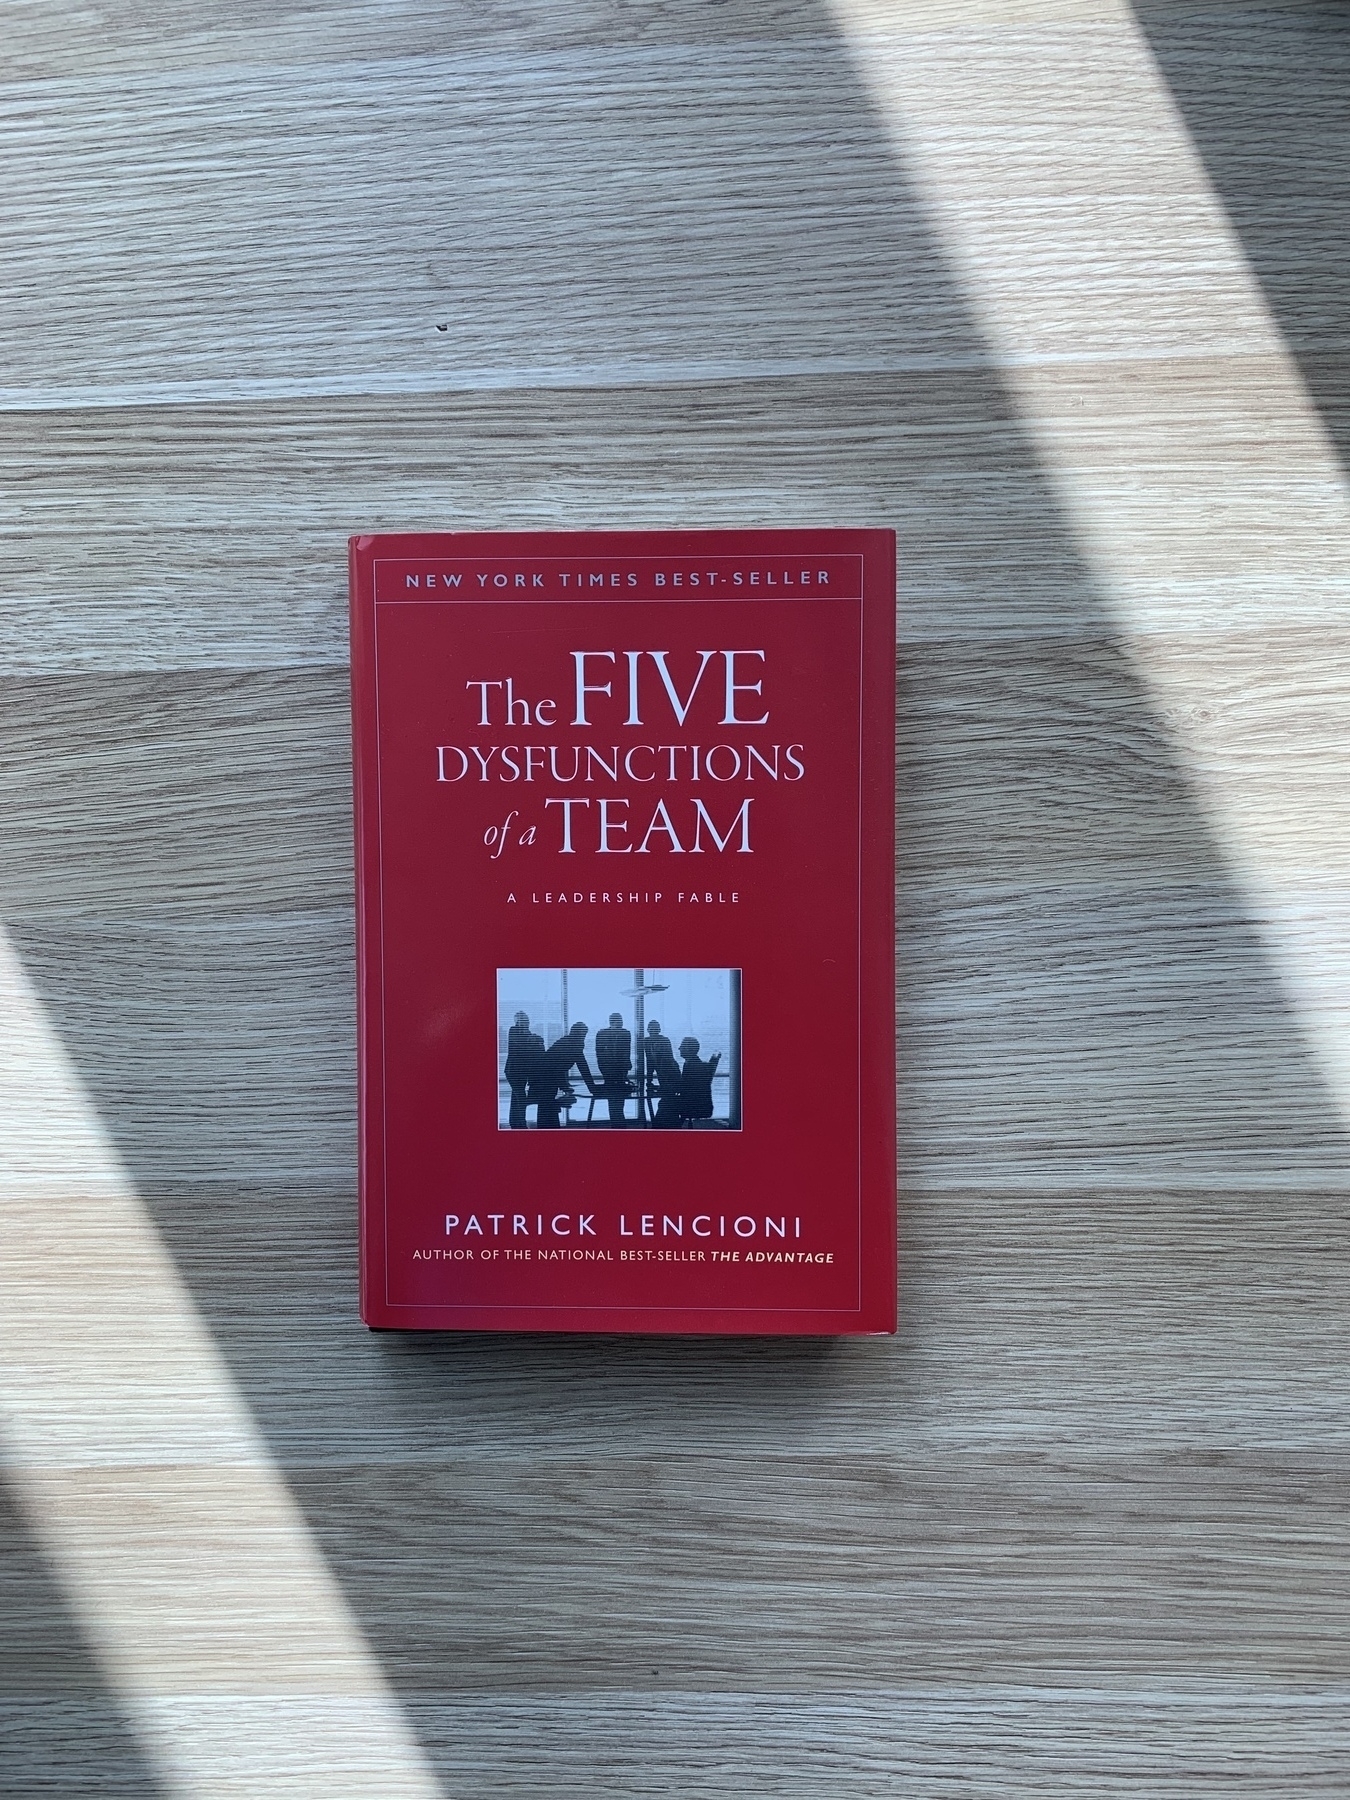 A red book (The Five Dysfunctions of a Team) on my desk with two strips of sunlight either side of it